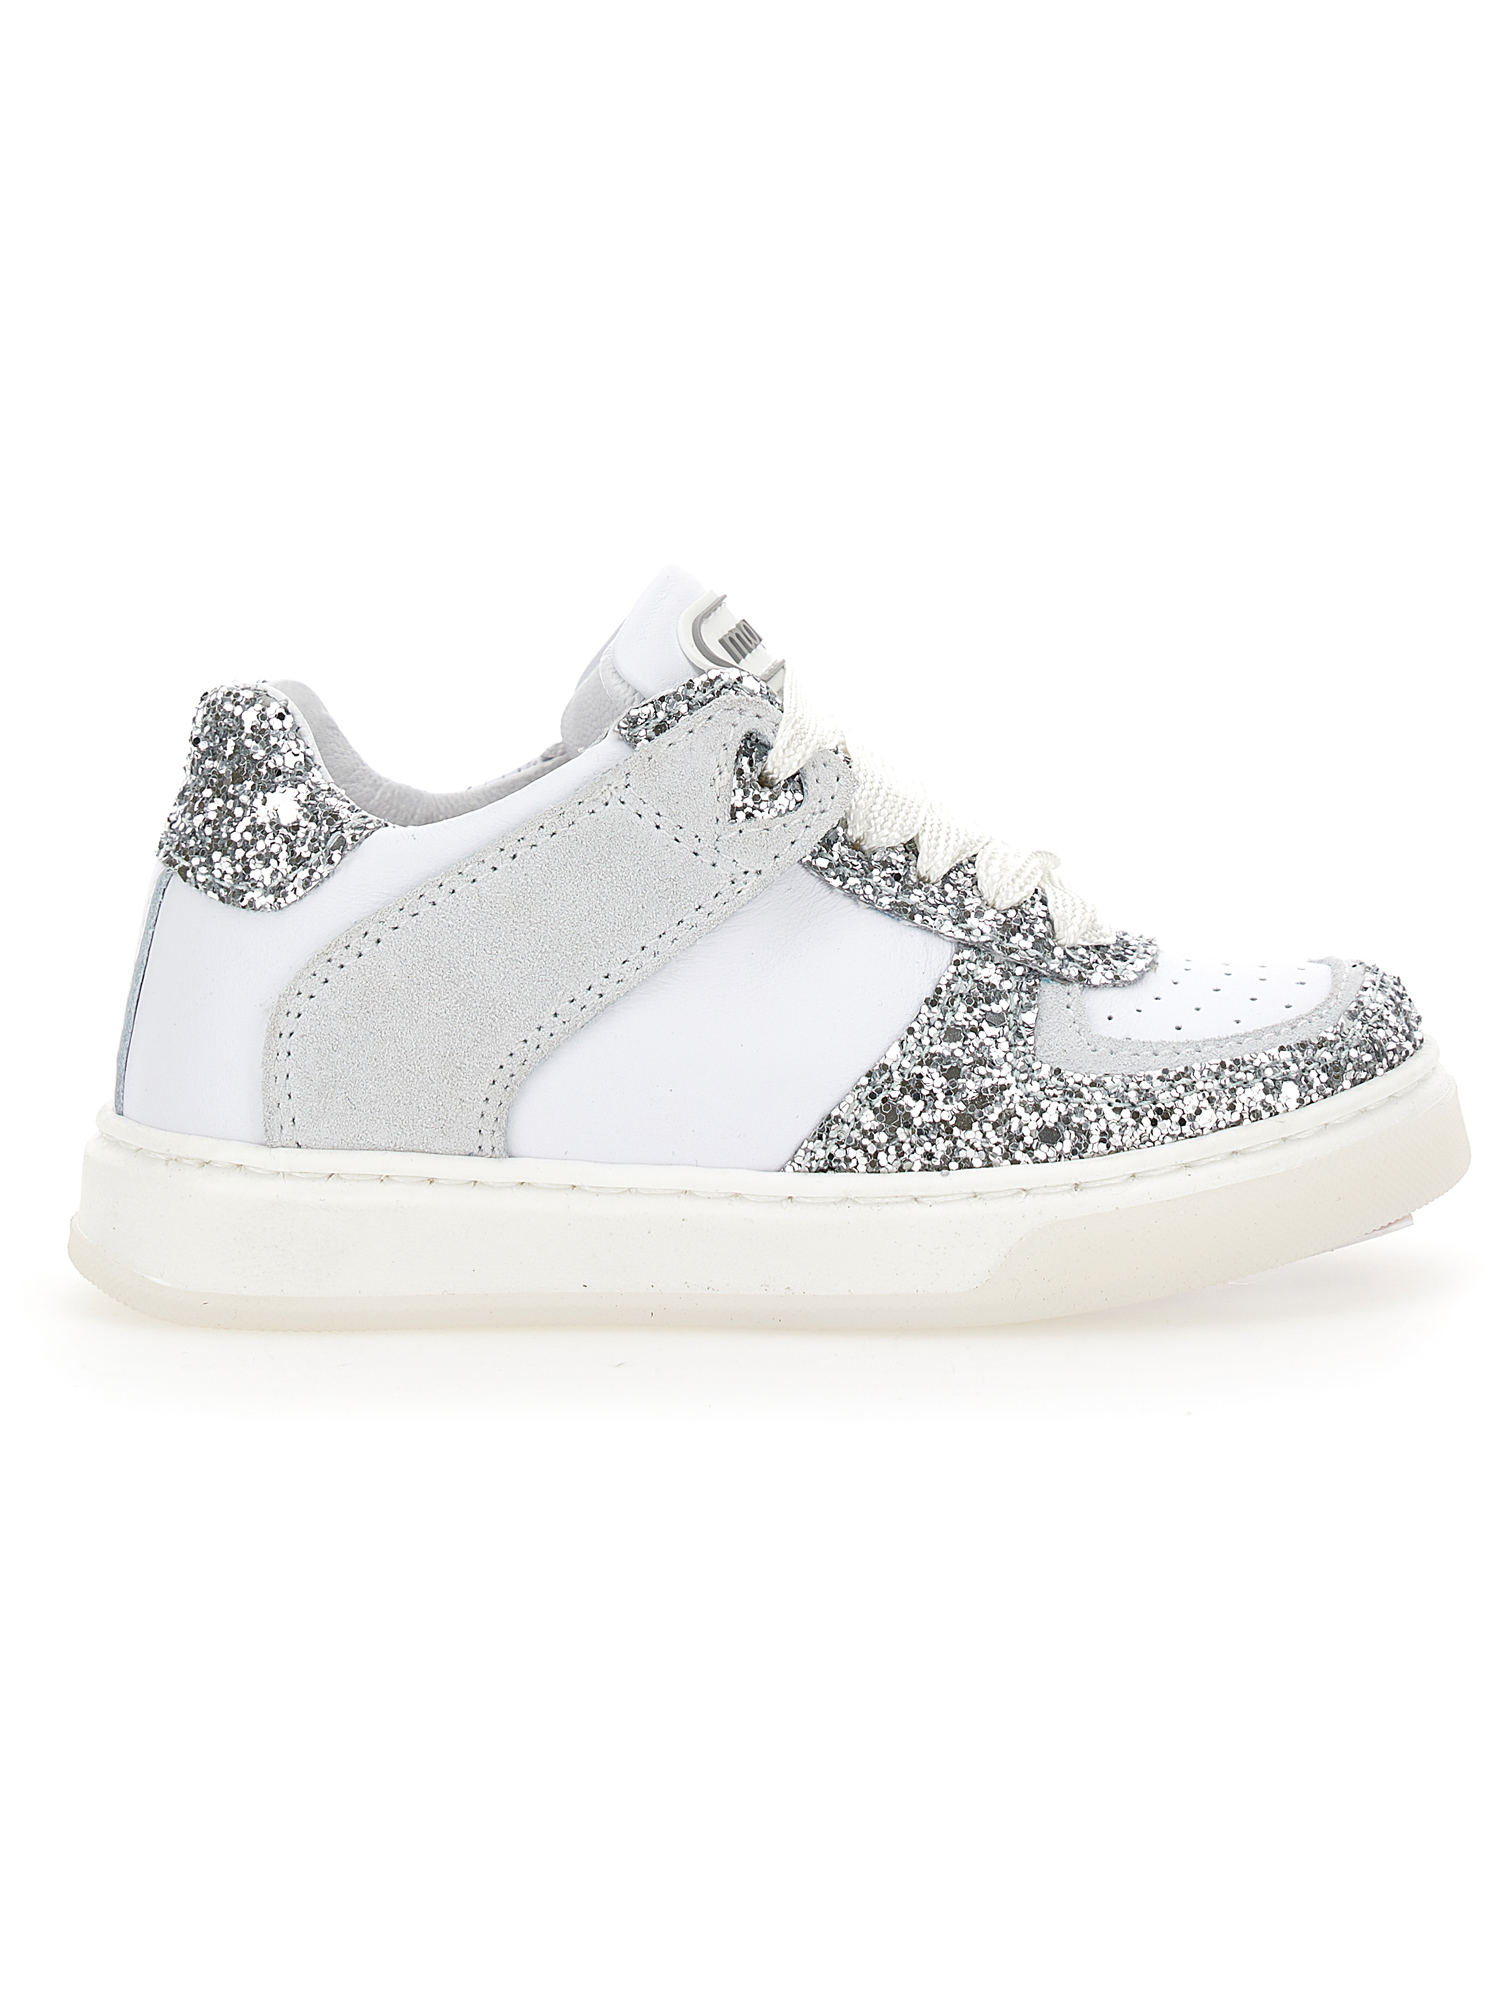 Crust leather and glitter sneakers girl | Monnalisa Portugal